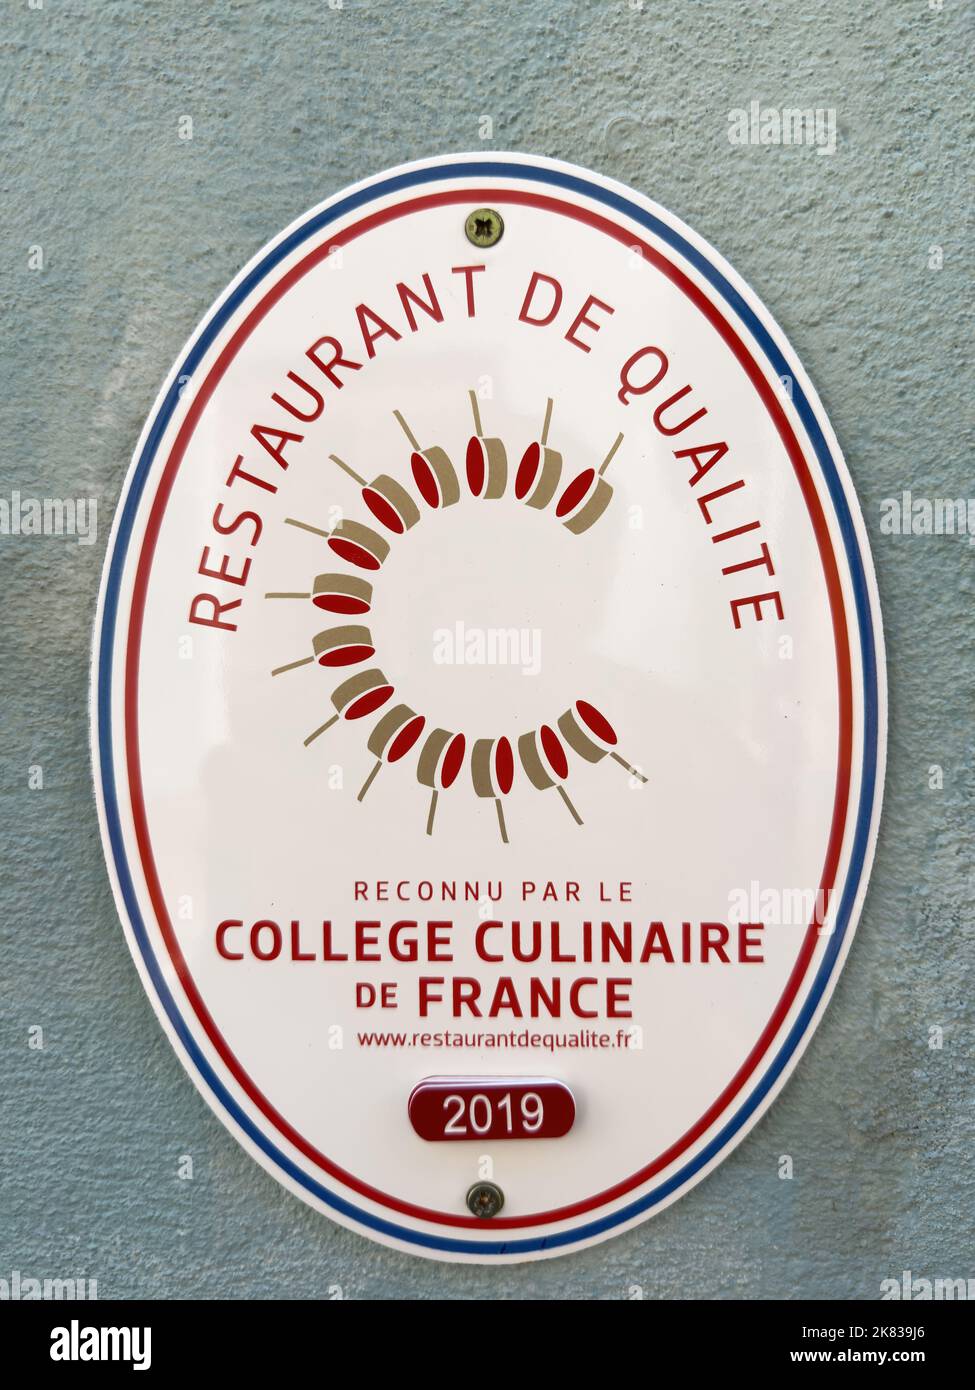 Ribeauville, France - Sep 22, 2022: Signage at the entrance of restaurant - restaurant de qualite recognized by the College Culinaire de France Stock Photo